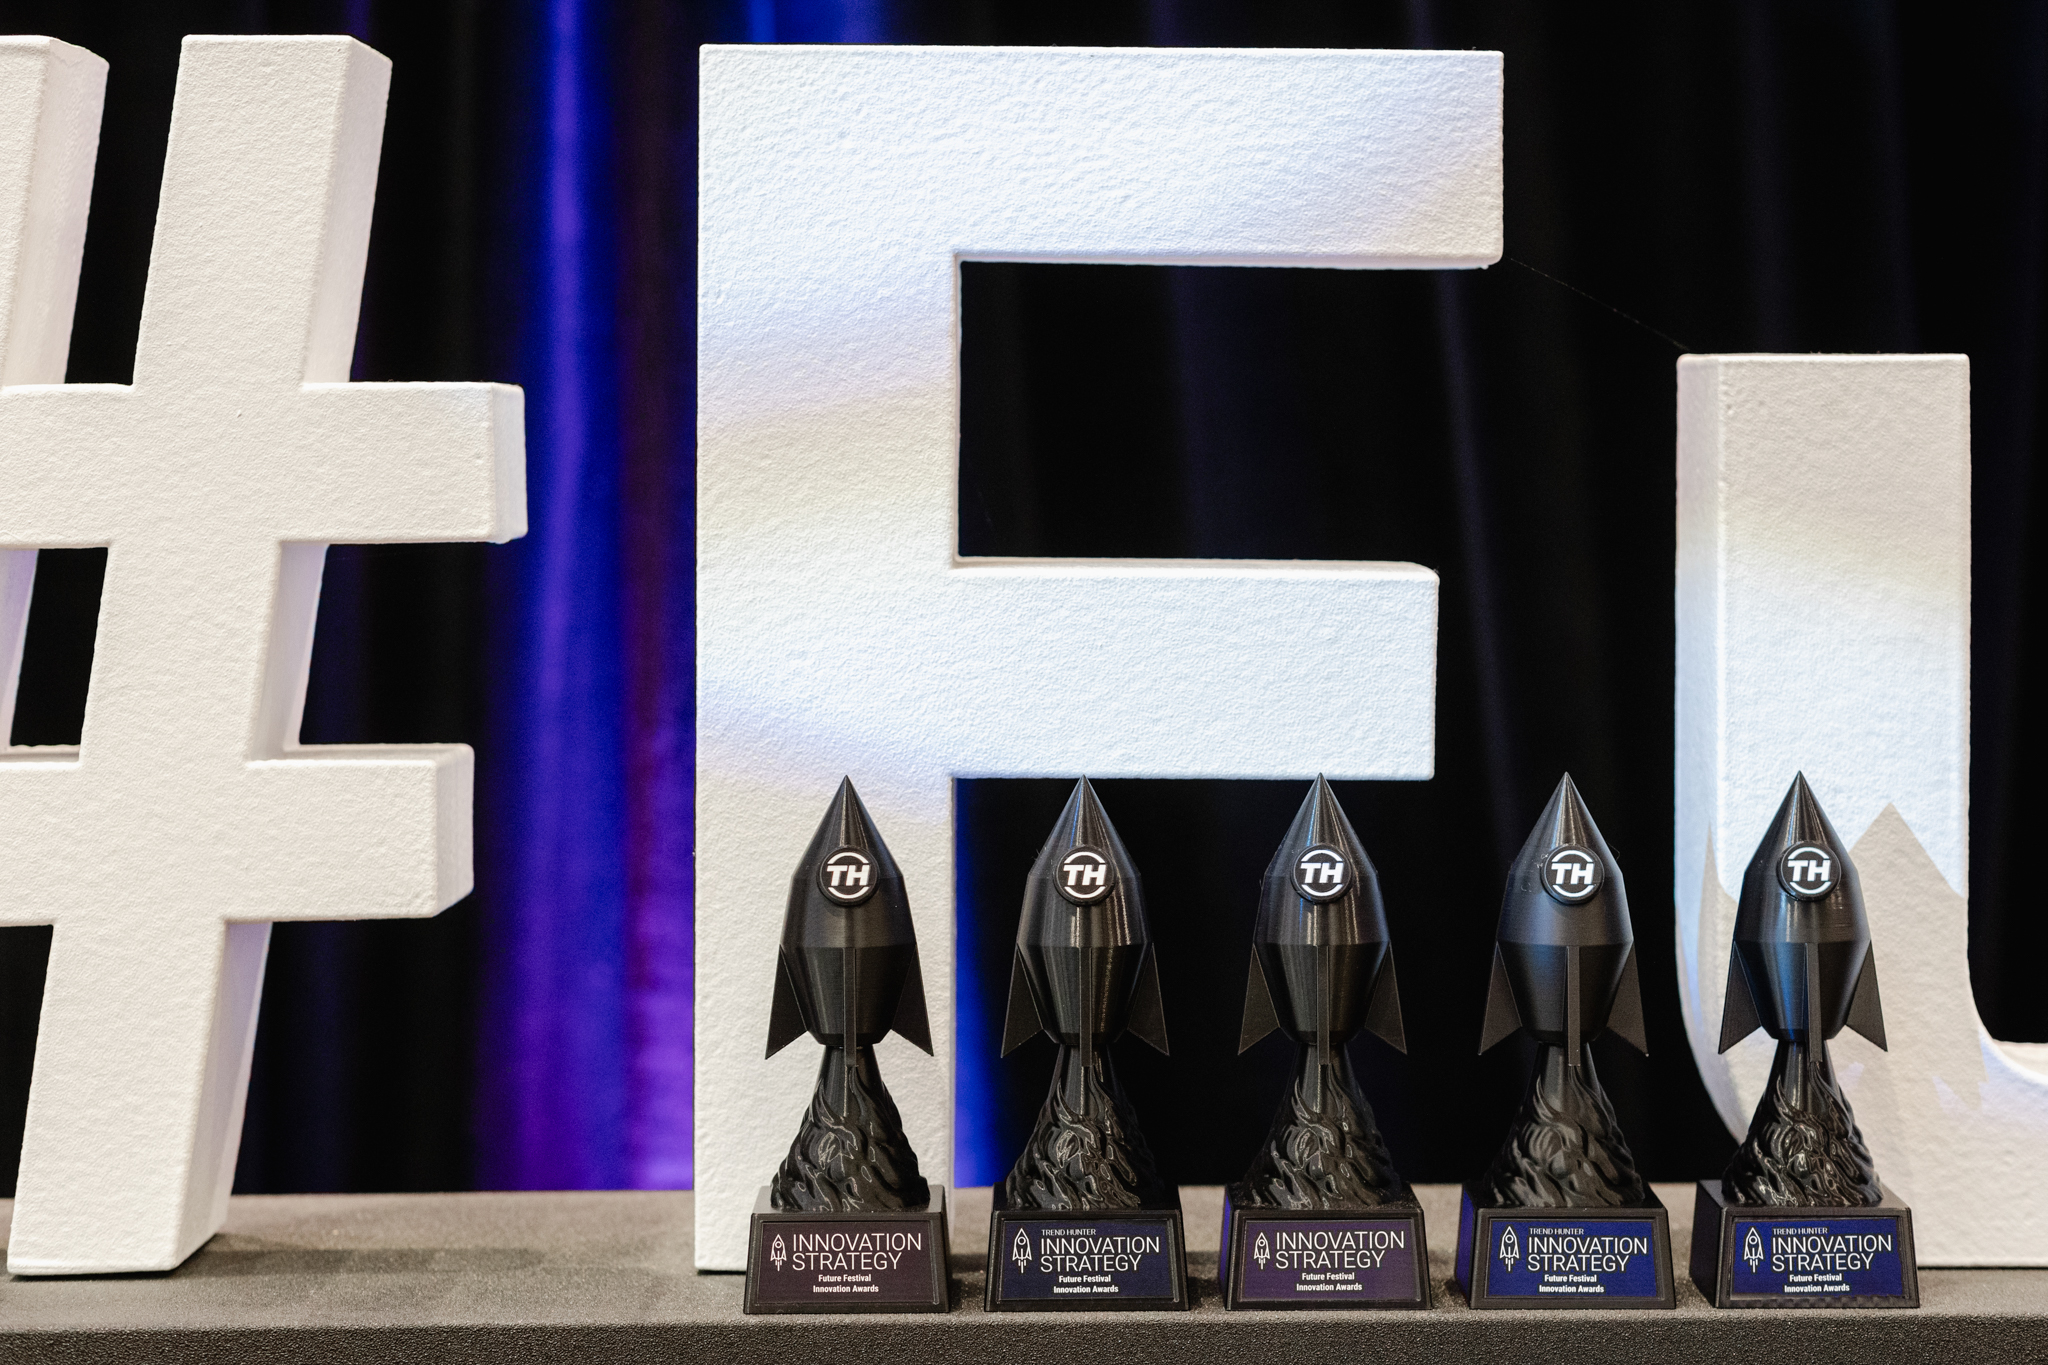 A collection of trophies displayed prominently alongside the word fu, captured beautifully through event photography.